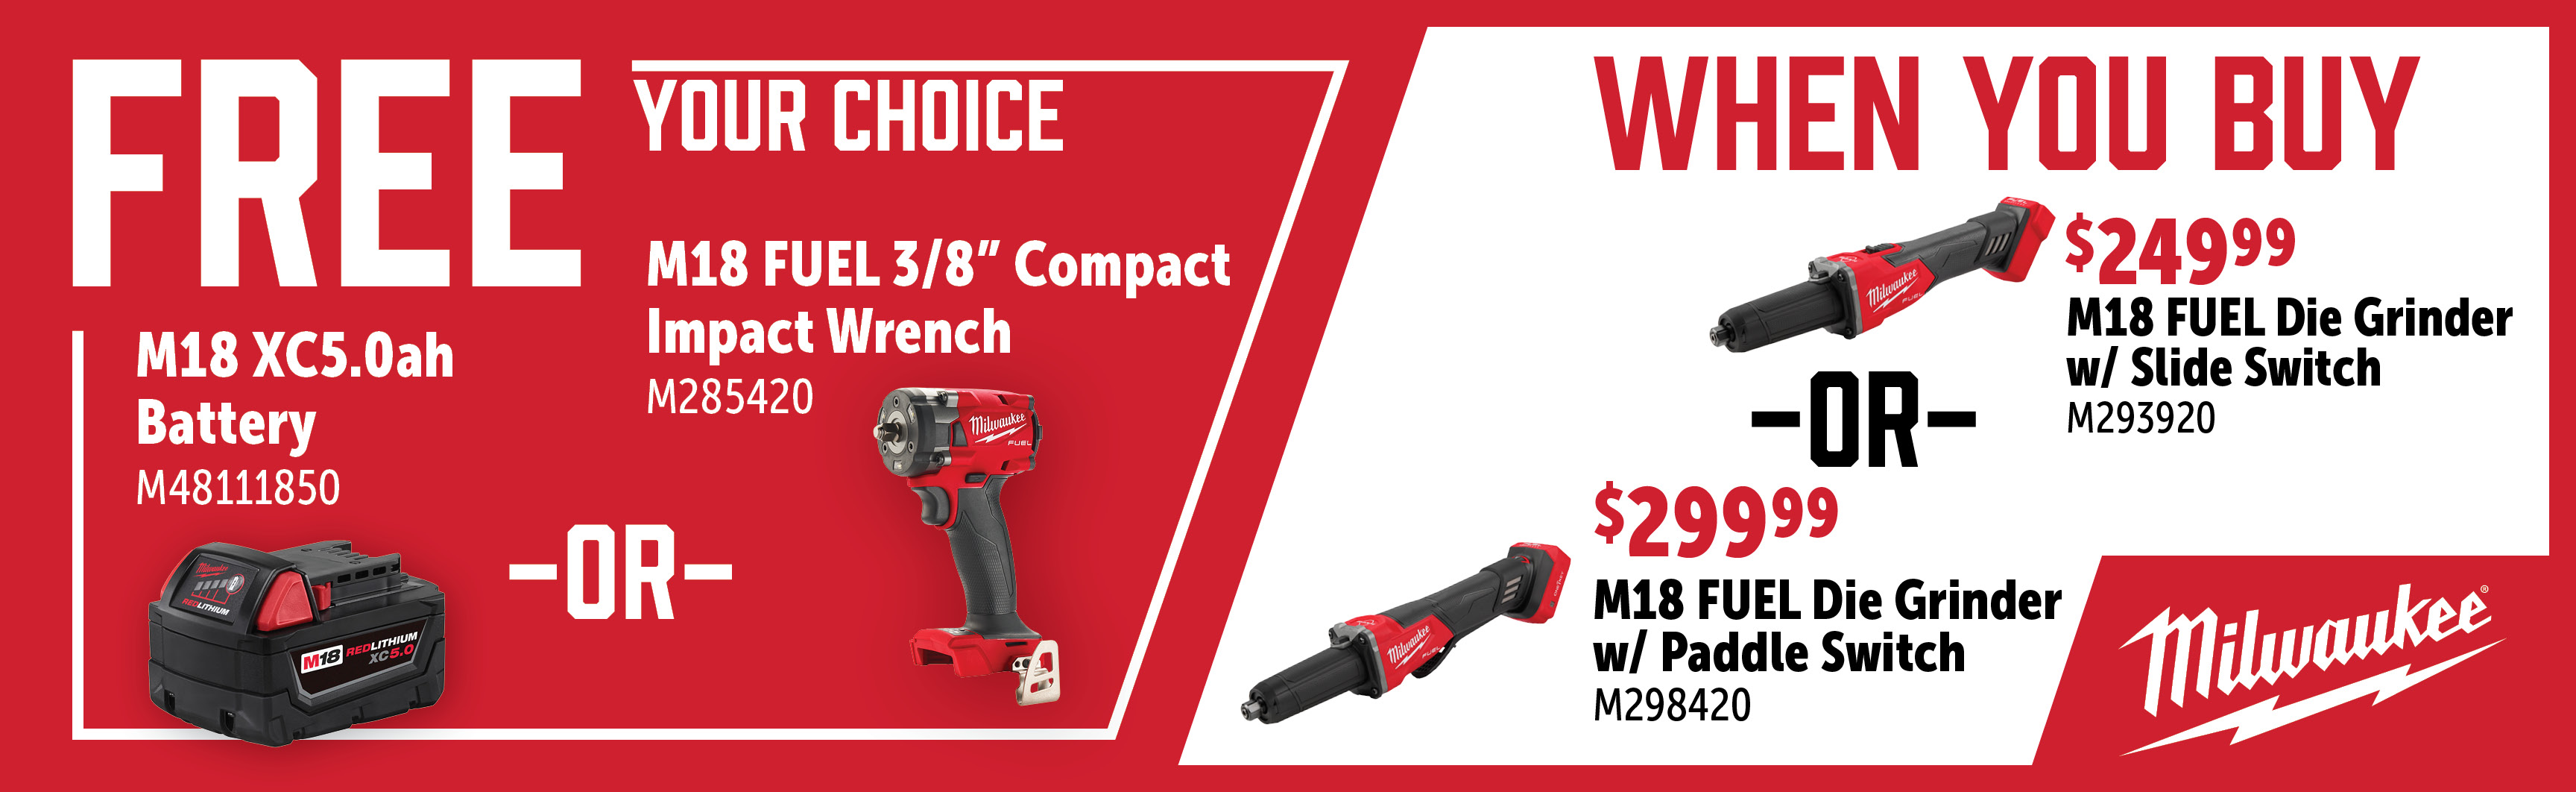 Milwaukee Feb-Apr: Buy an M298420 or M293920 and Get a FREE M48111850 or M285420